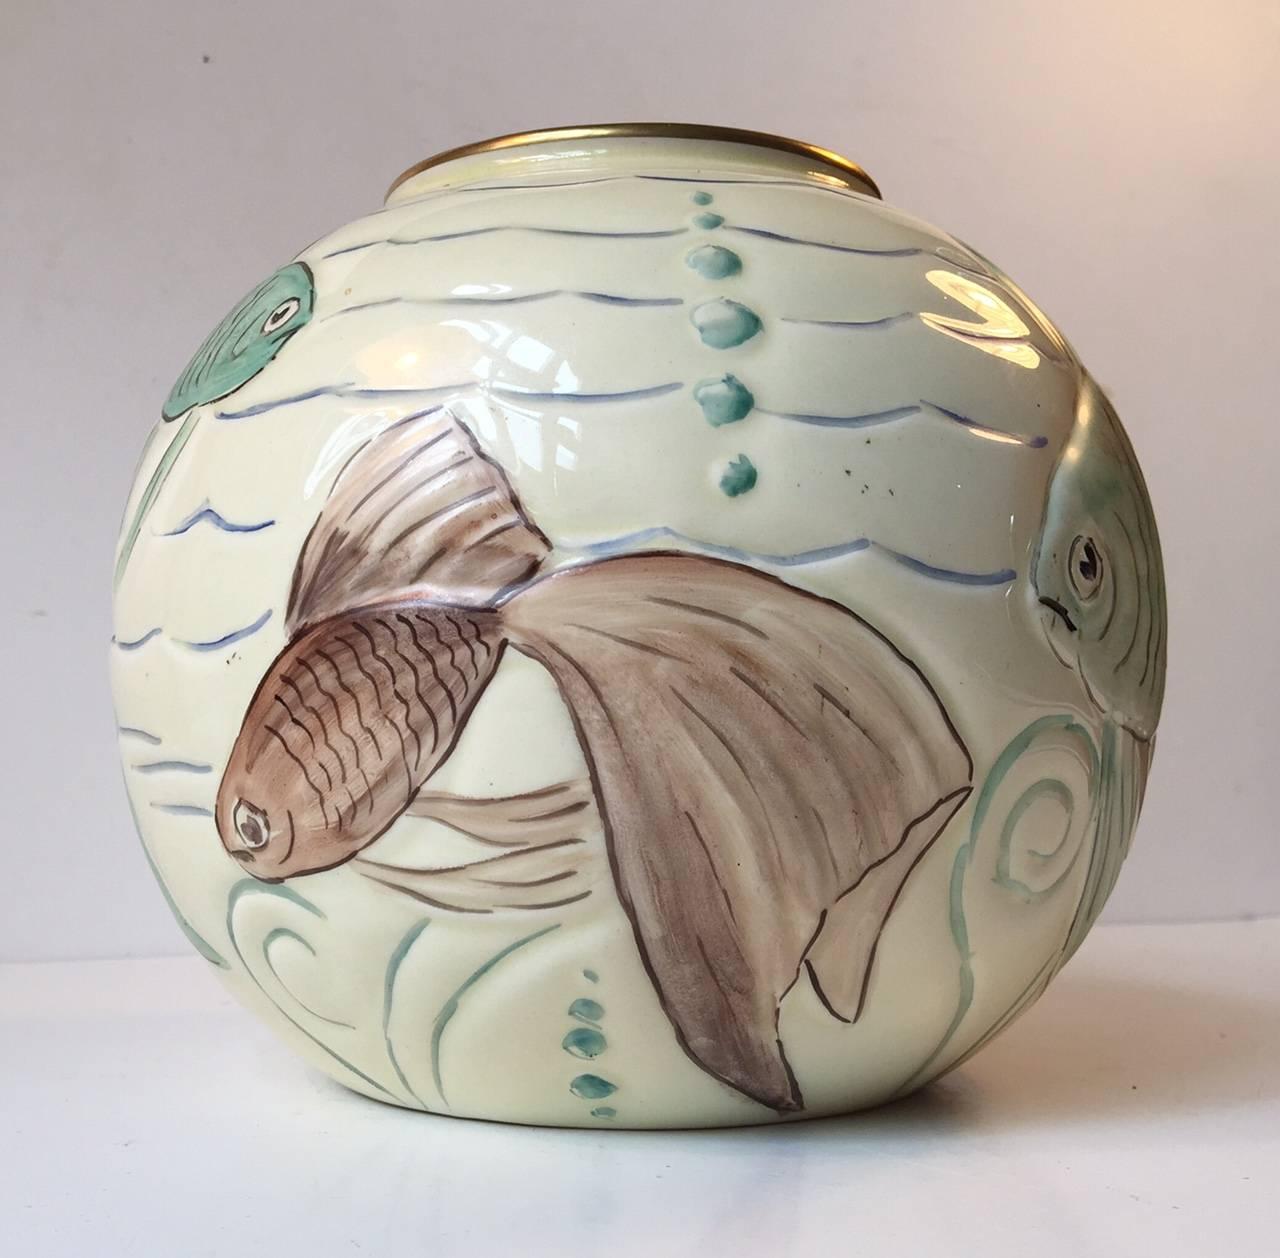 English Art Deco Porcelain Ball Vase with 'Fish' Motif's by Spode's Royal Jasmine, 1930s